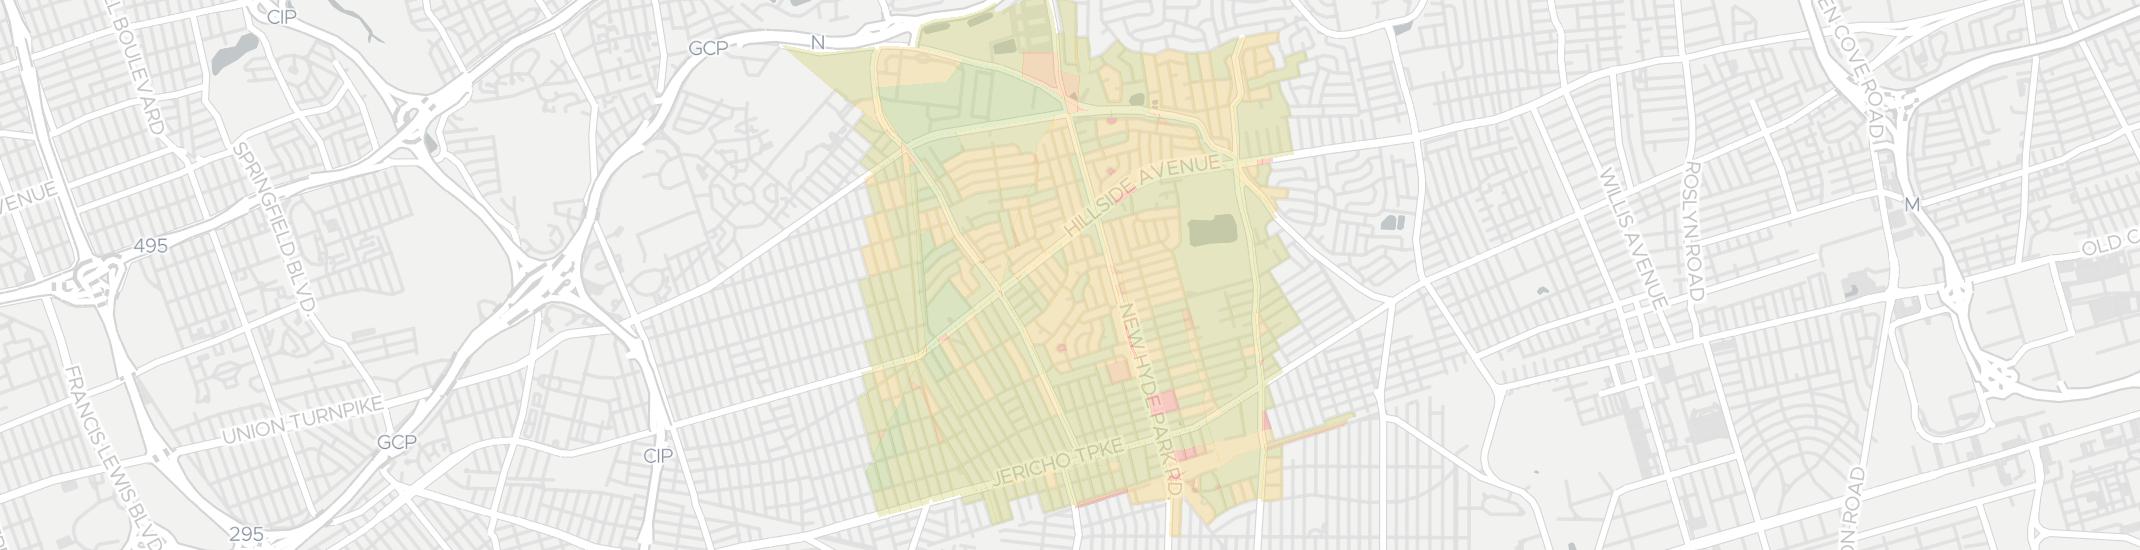 North New Hyde Park Internet Competition Map. Click for interactive map.